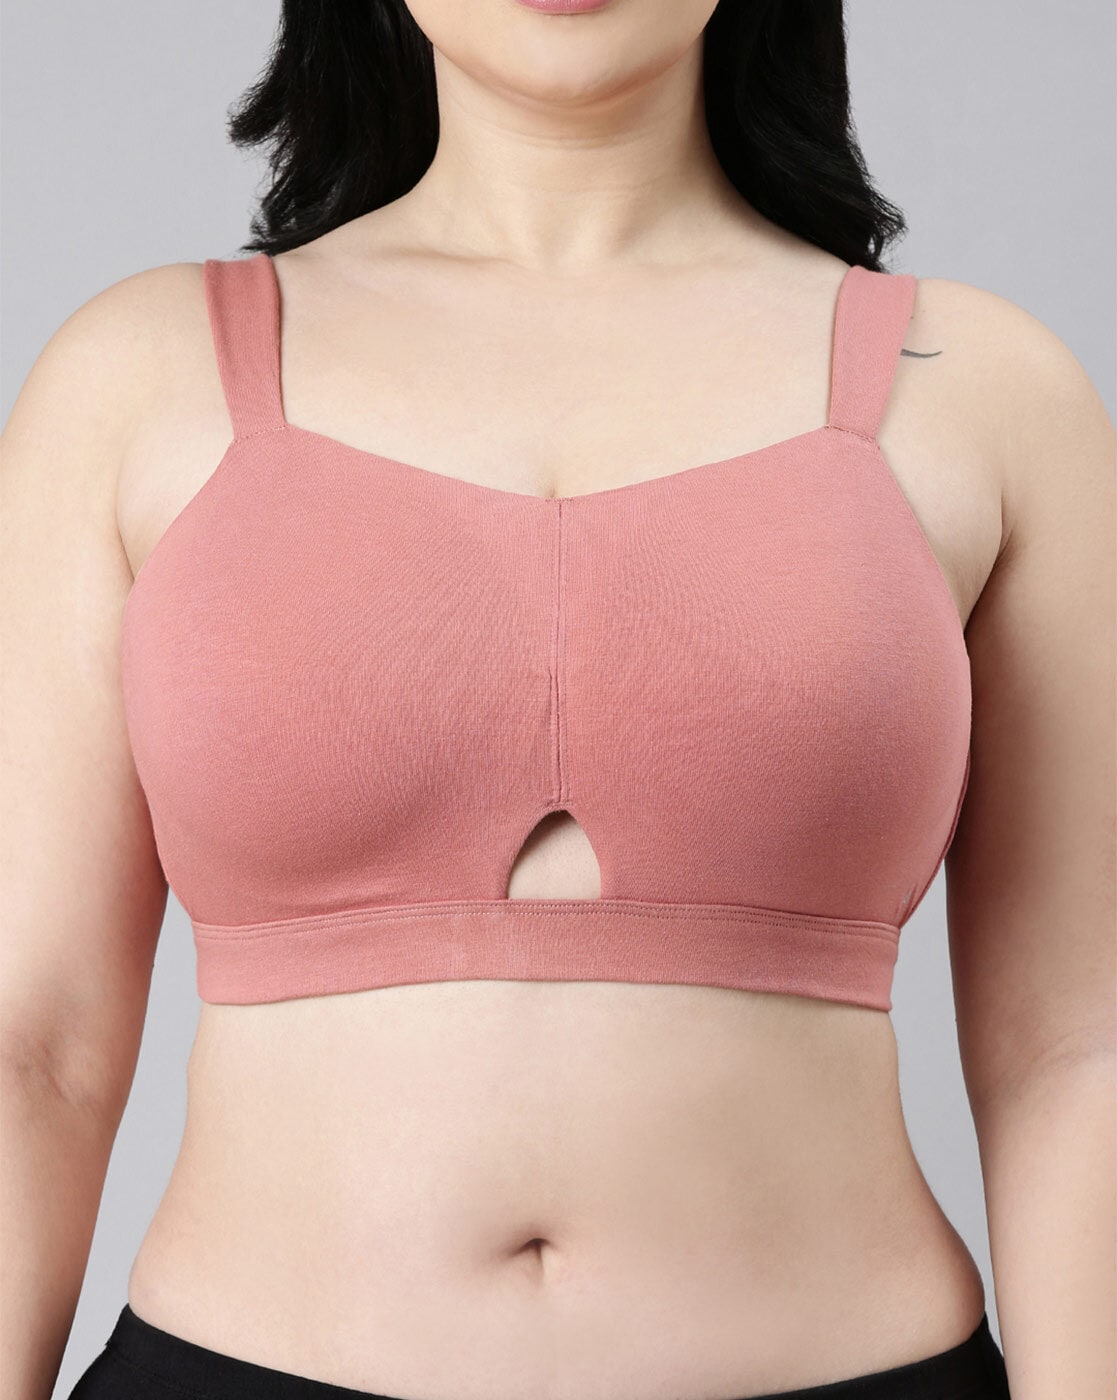 Enamor Rosette Womens Bra - Get Best Price from Manufacturers